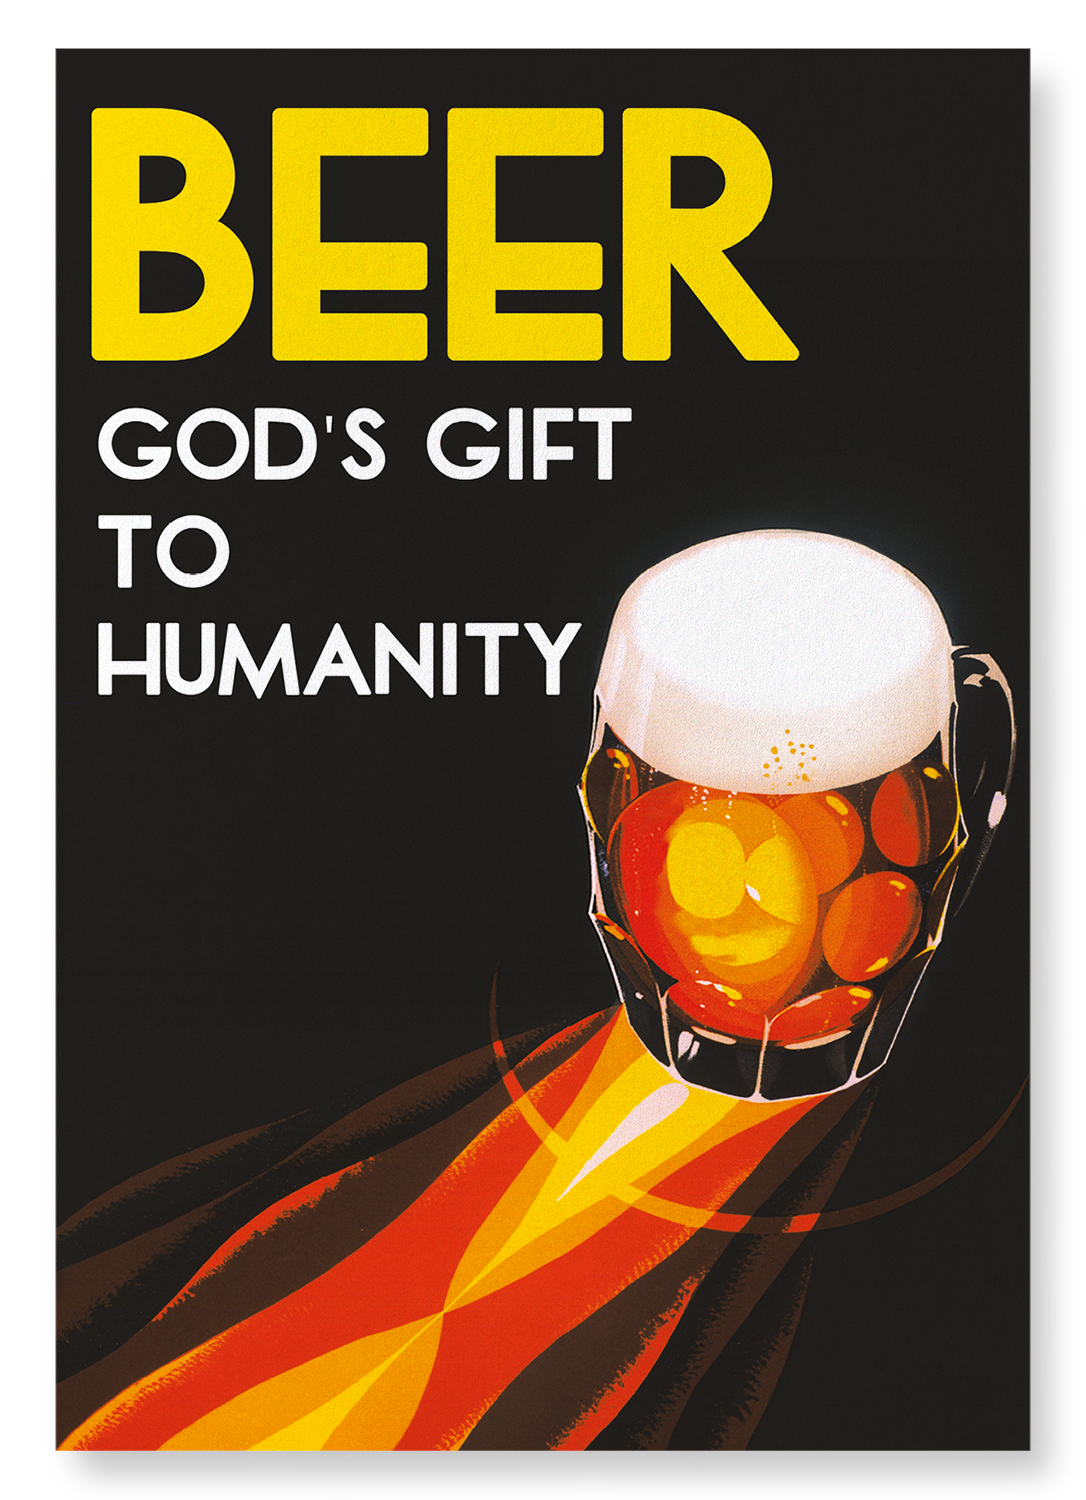 BEER: GOD'S GIFT TO HUMANITY